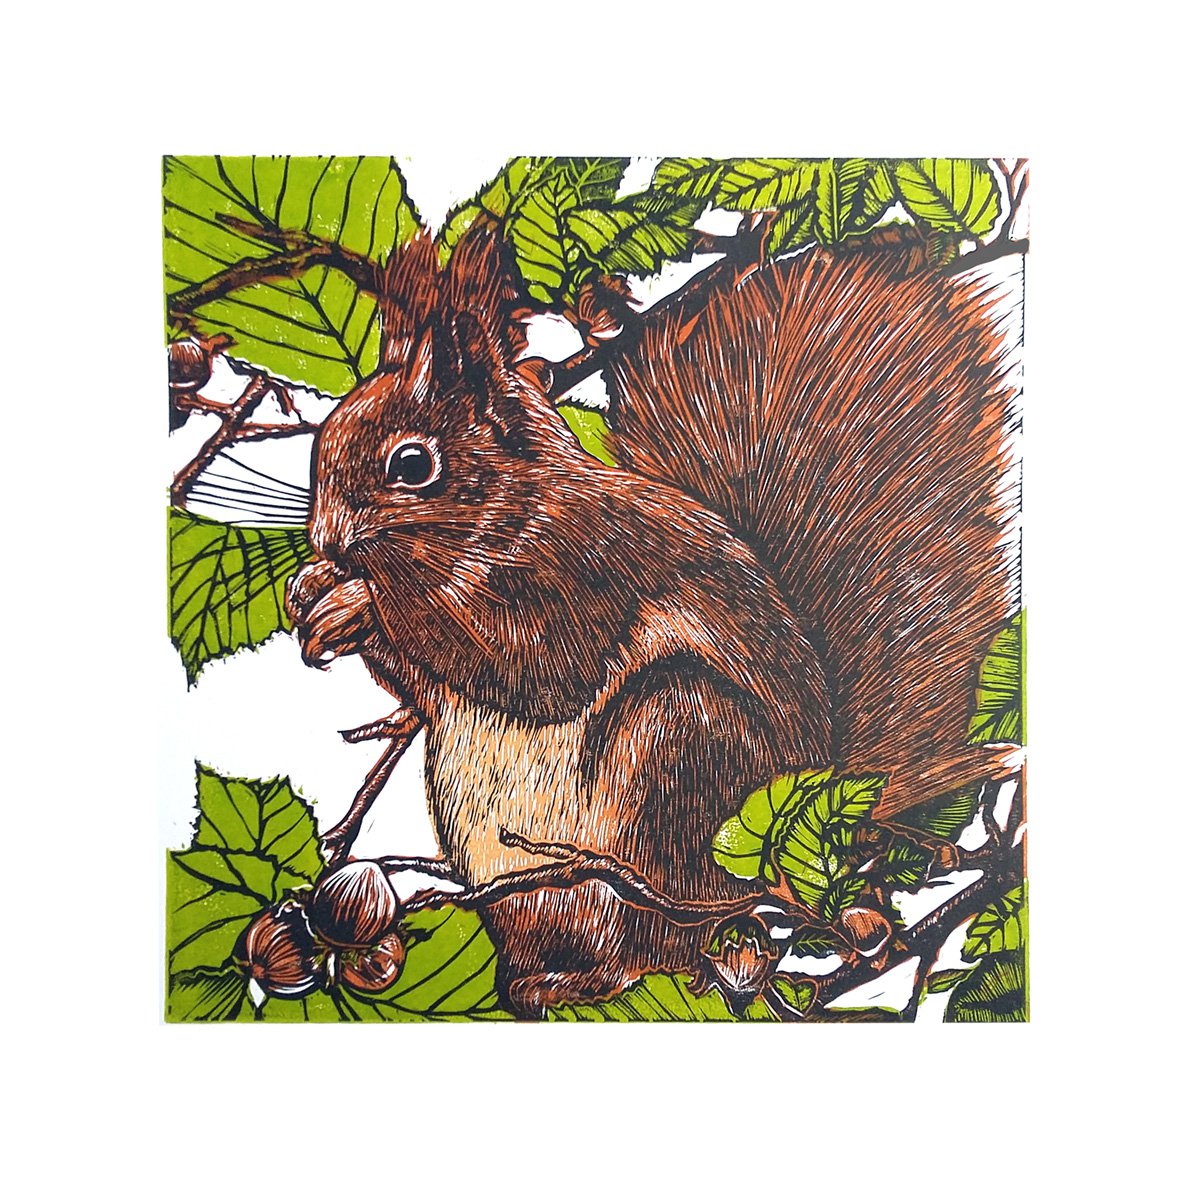 Natures feast (linocut red squirrel) by Carolynne Coulson